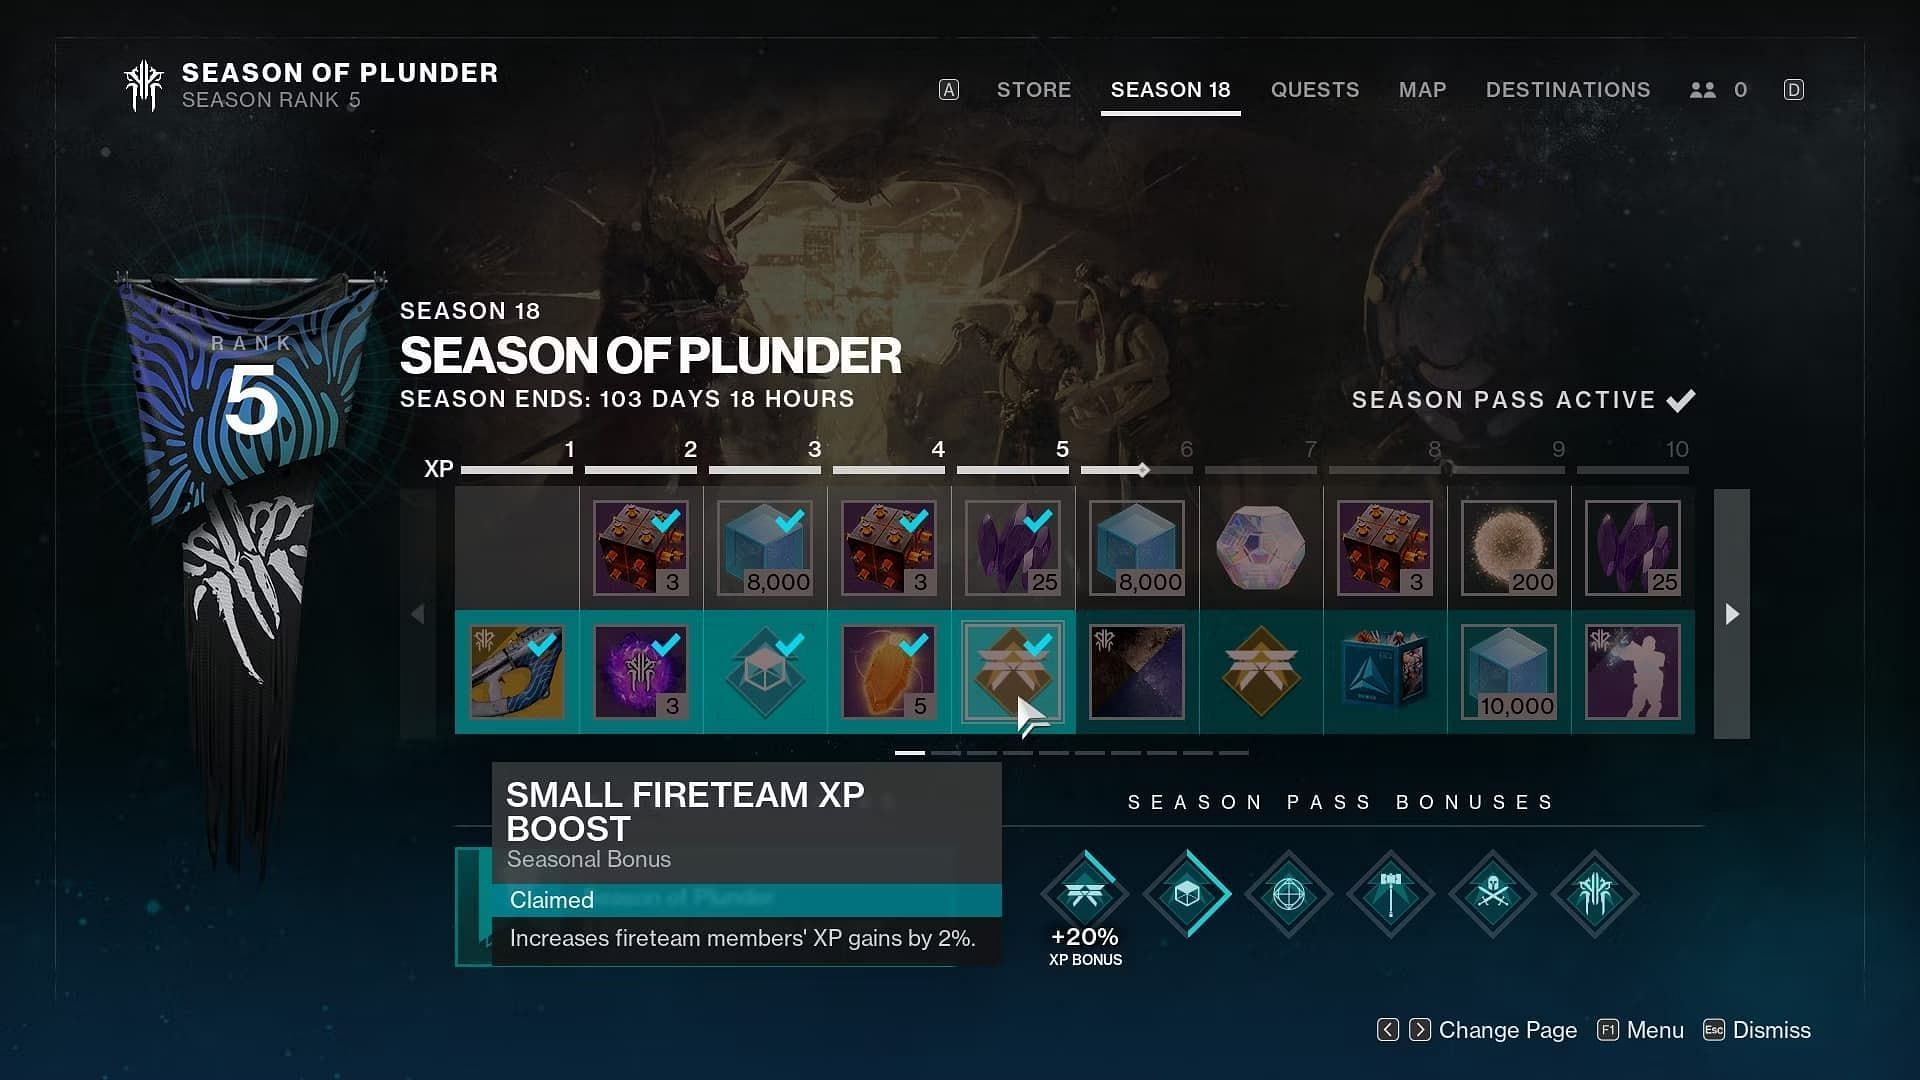 Shared Wisdom requires at least one player in the Fireteam to have unlocked the first rank of the Small Fireteam XP Boost on the Season Pass (Image via Bungie)